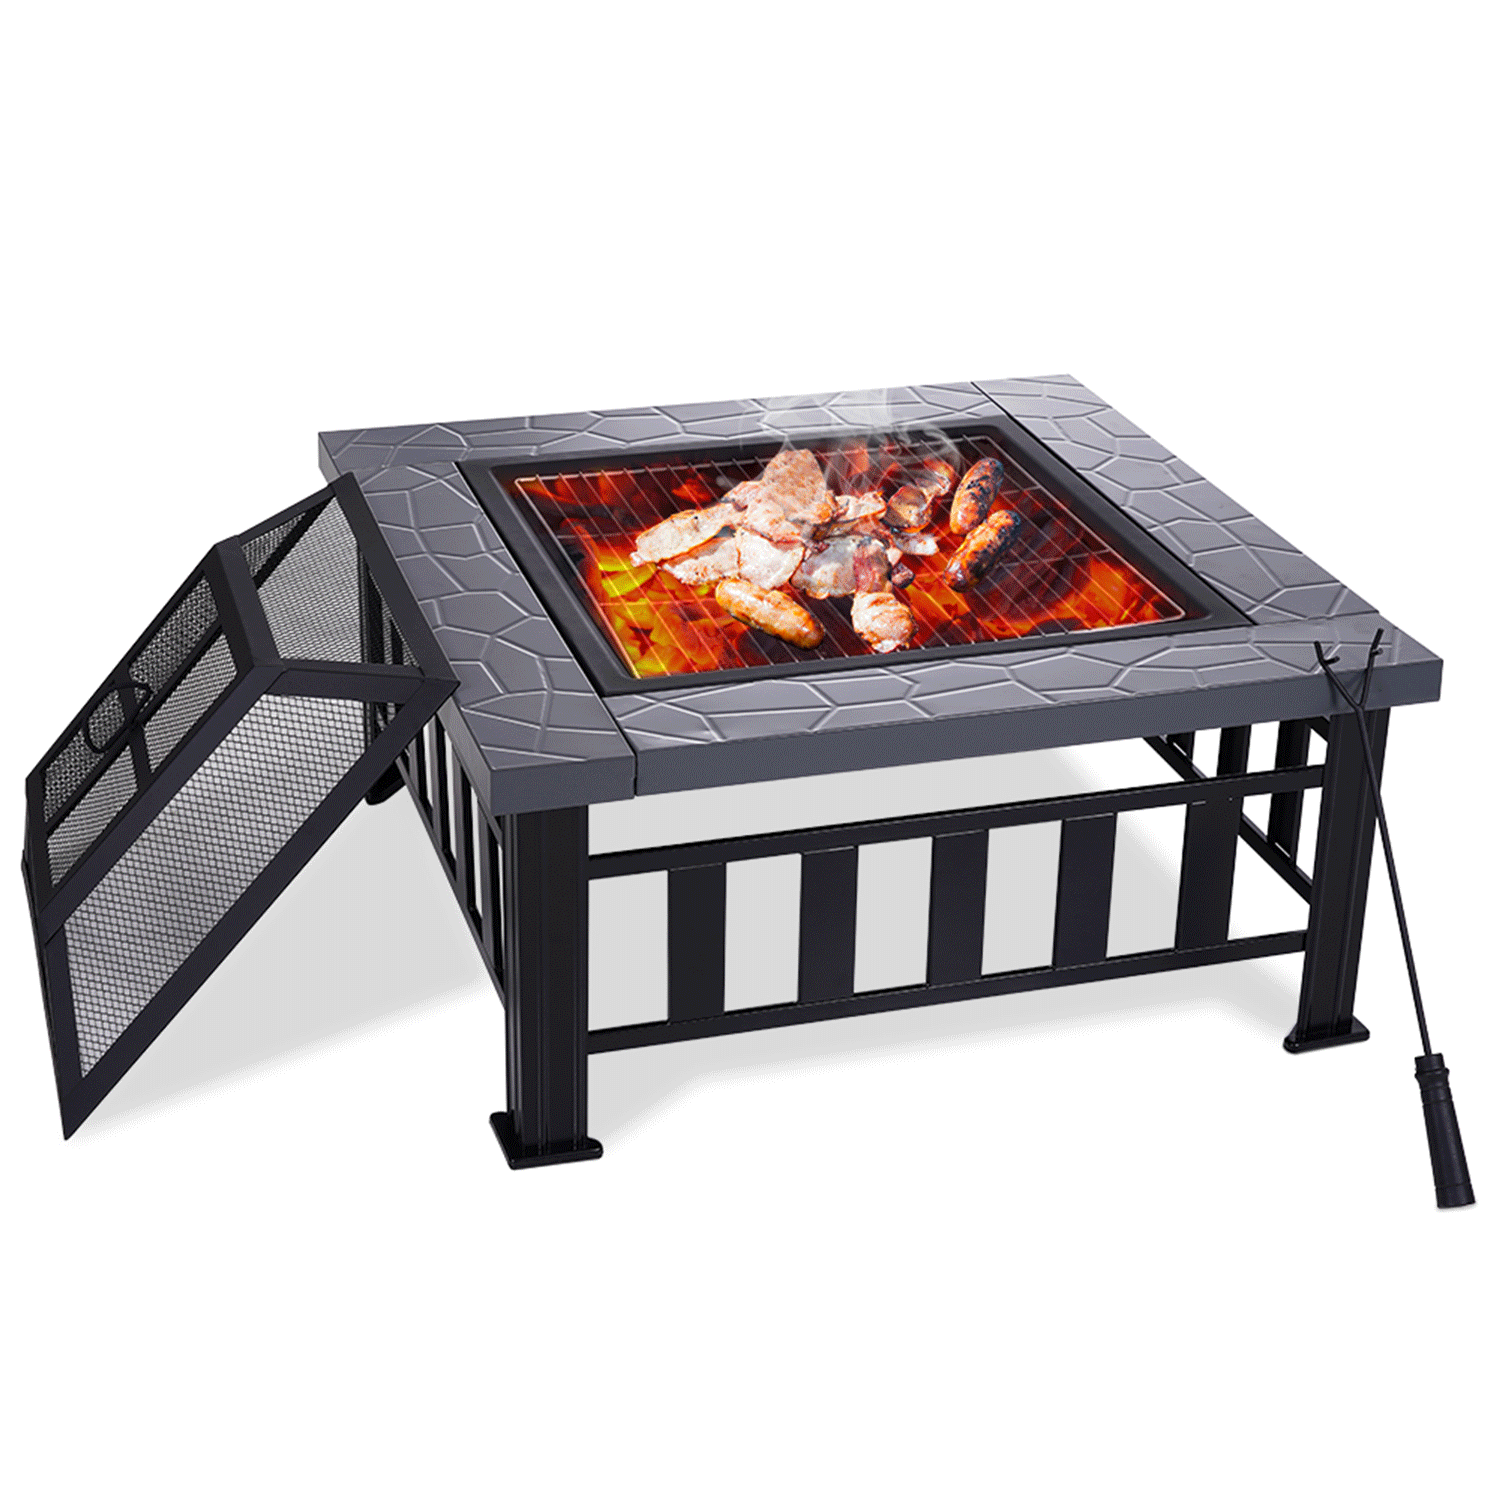 Yardom 34 inch Outdoor Fire Pits BBQ Square Wood Burning Firepit Table -  Walmart.com